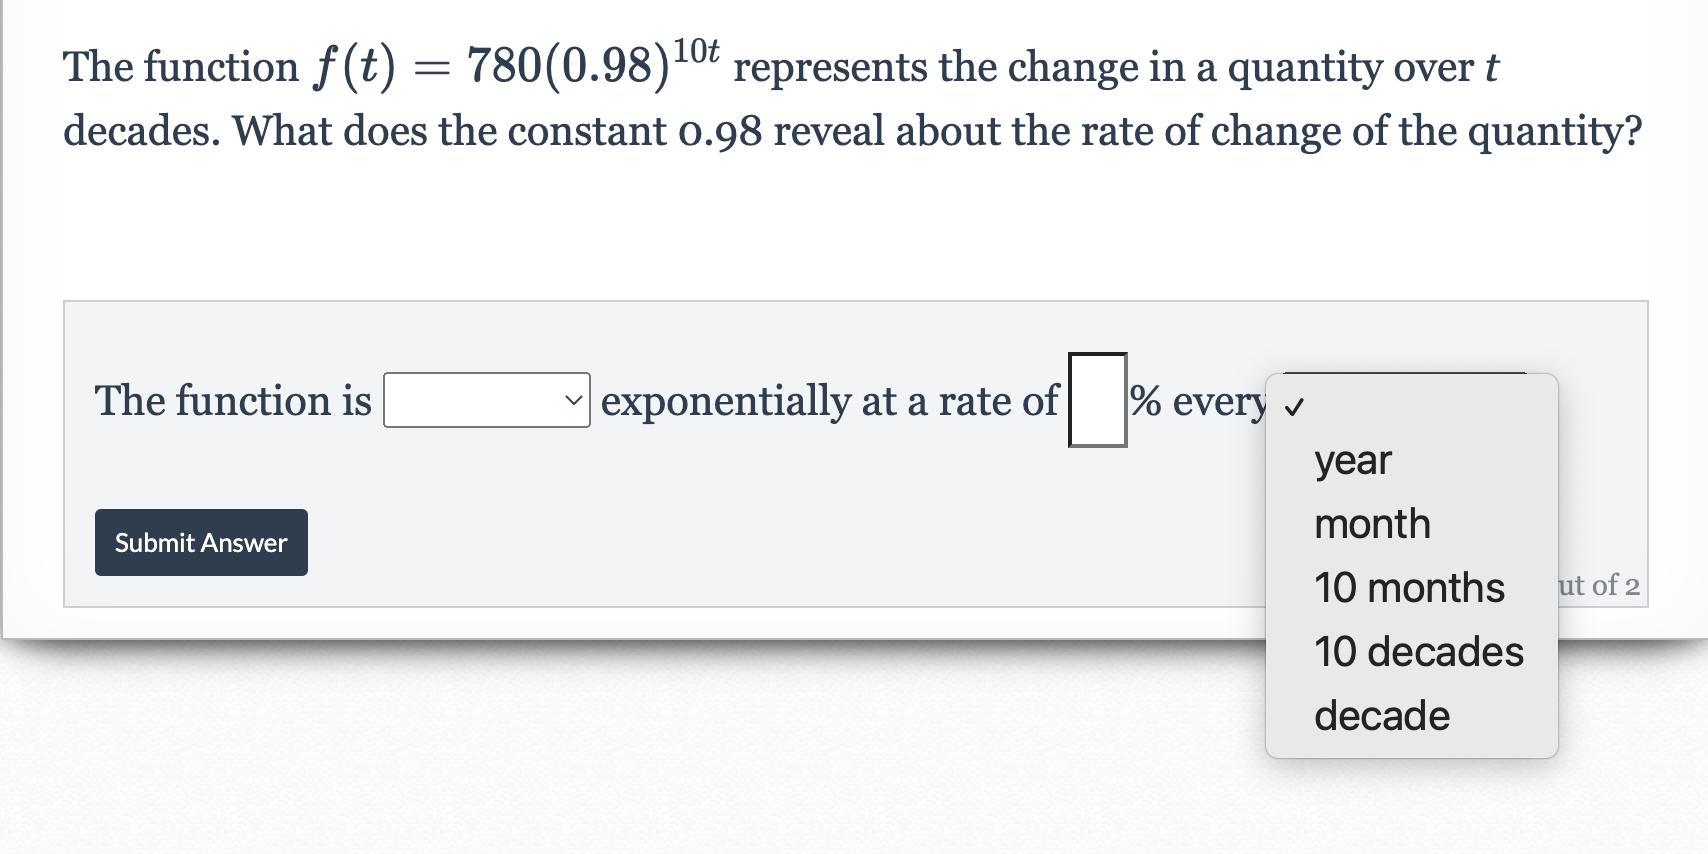 What Does The Constant 0.98 Reveal About The Rate Of Change Of The Quantity?